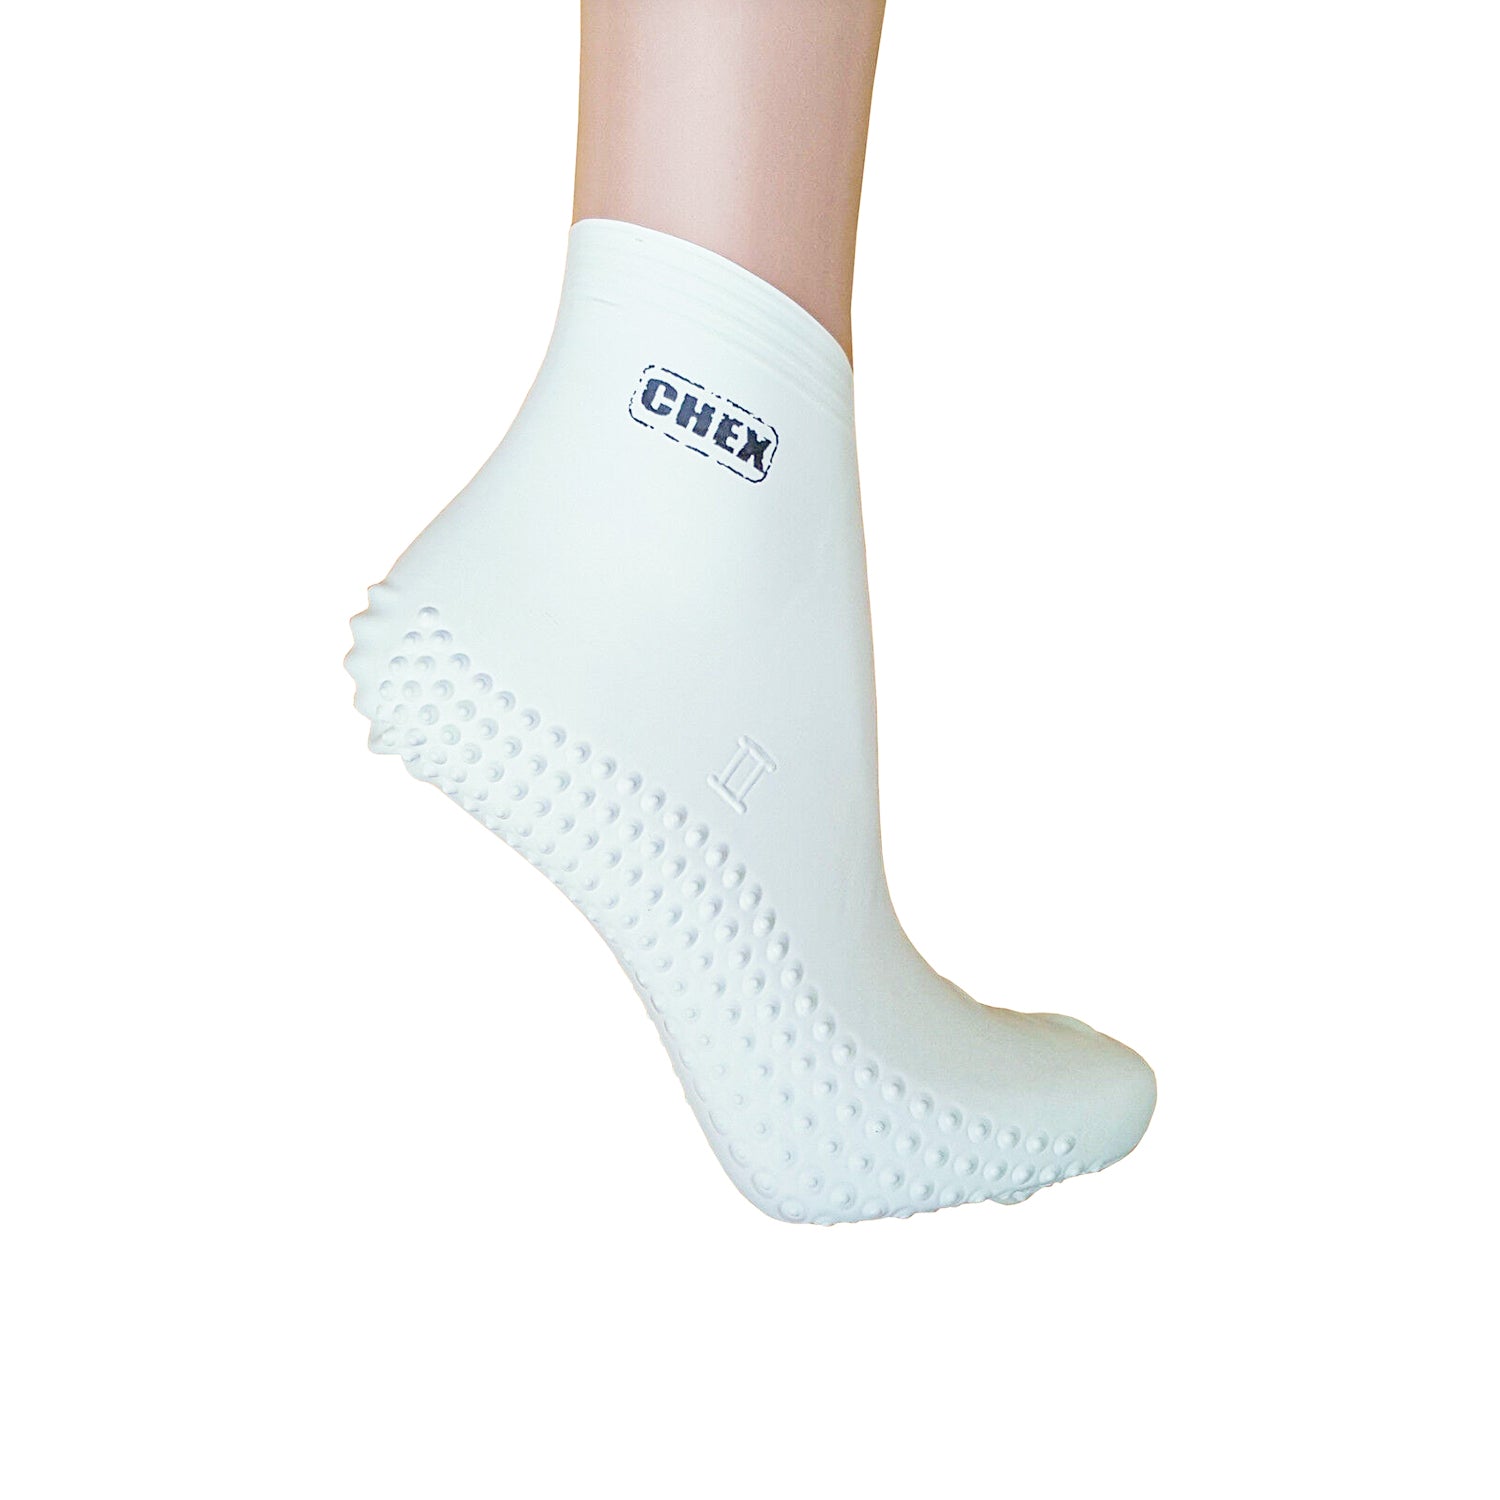 6 Reasons to Wear Yoga Socks! Best Yoga Products in UK